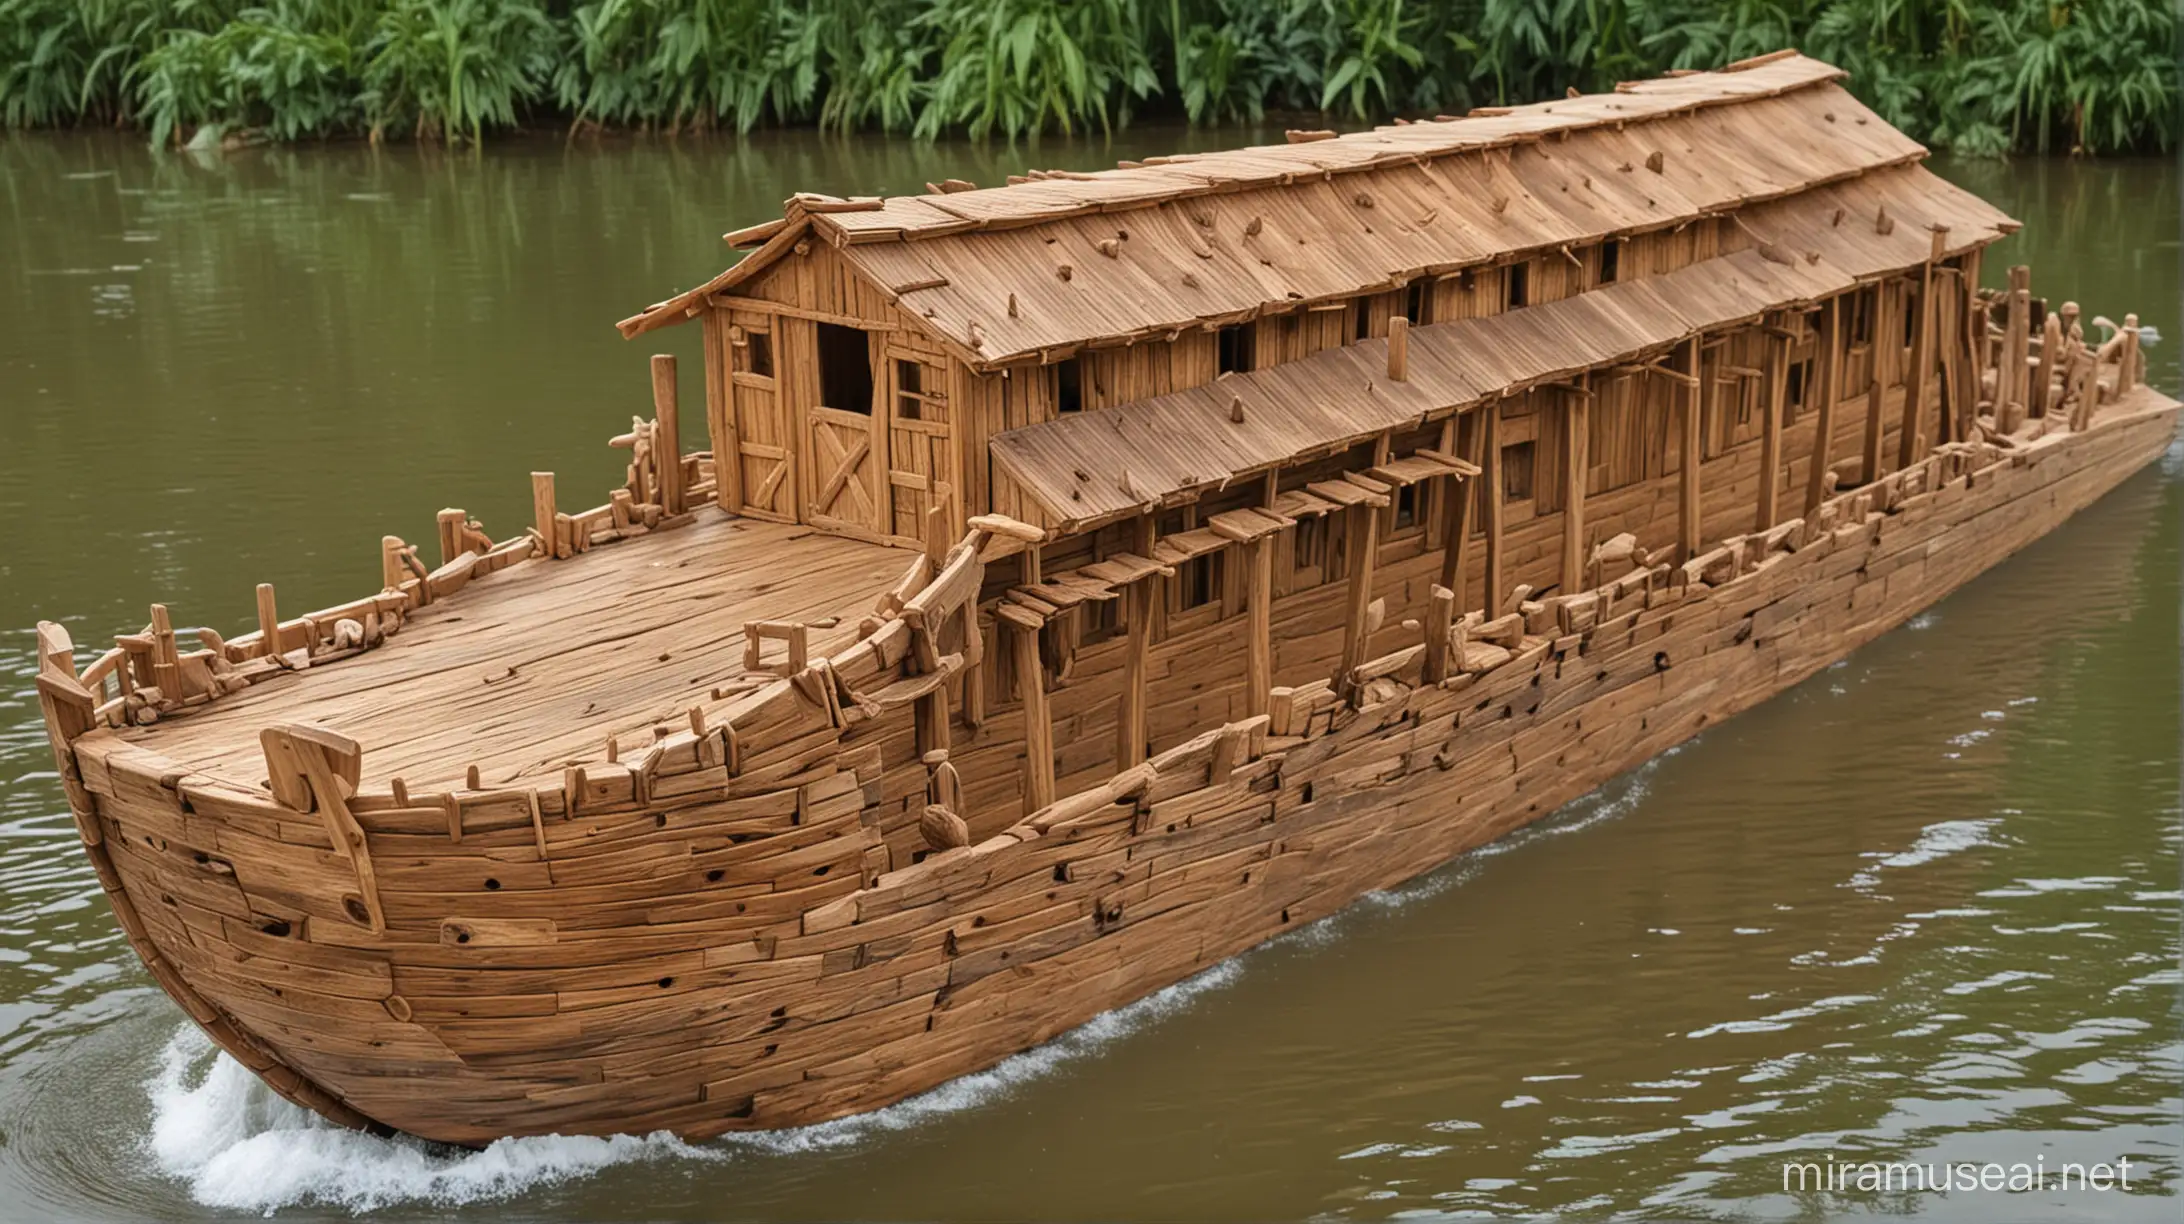 Noah's  ark, made of gopher wood, to go on the flood waters. It should be big enough for many different types of animals to enter in via a ramp.